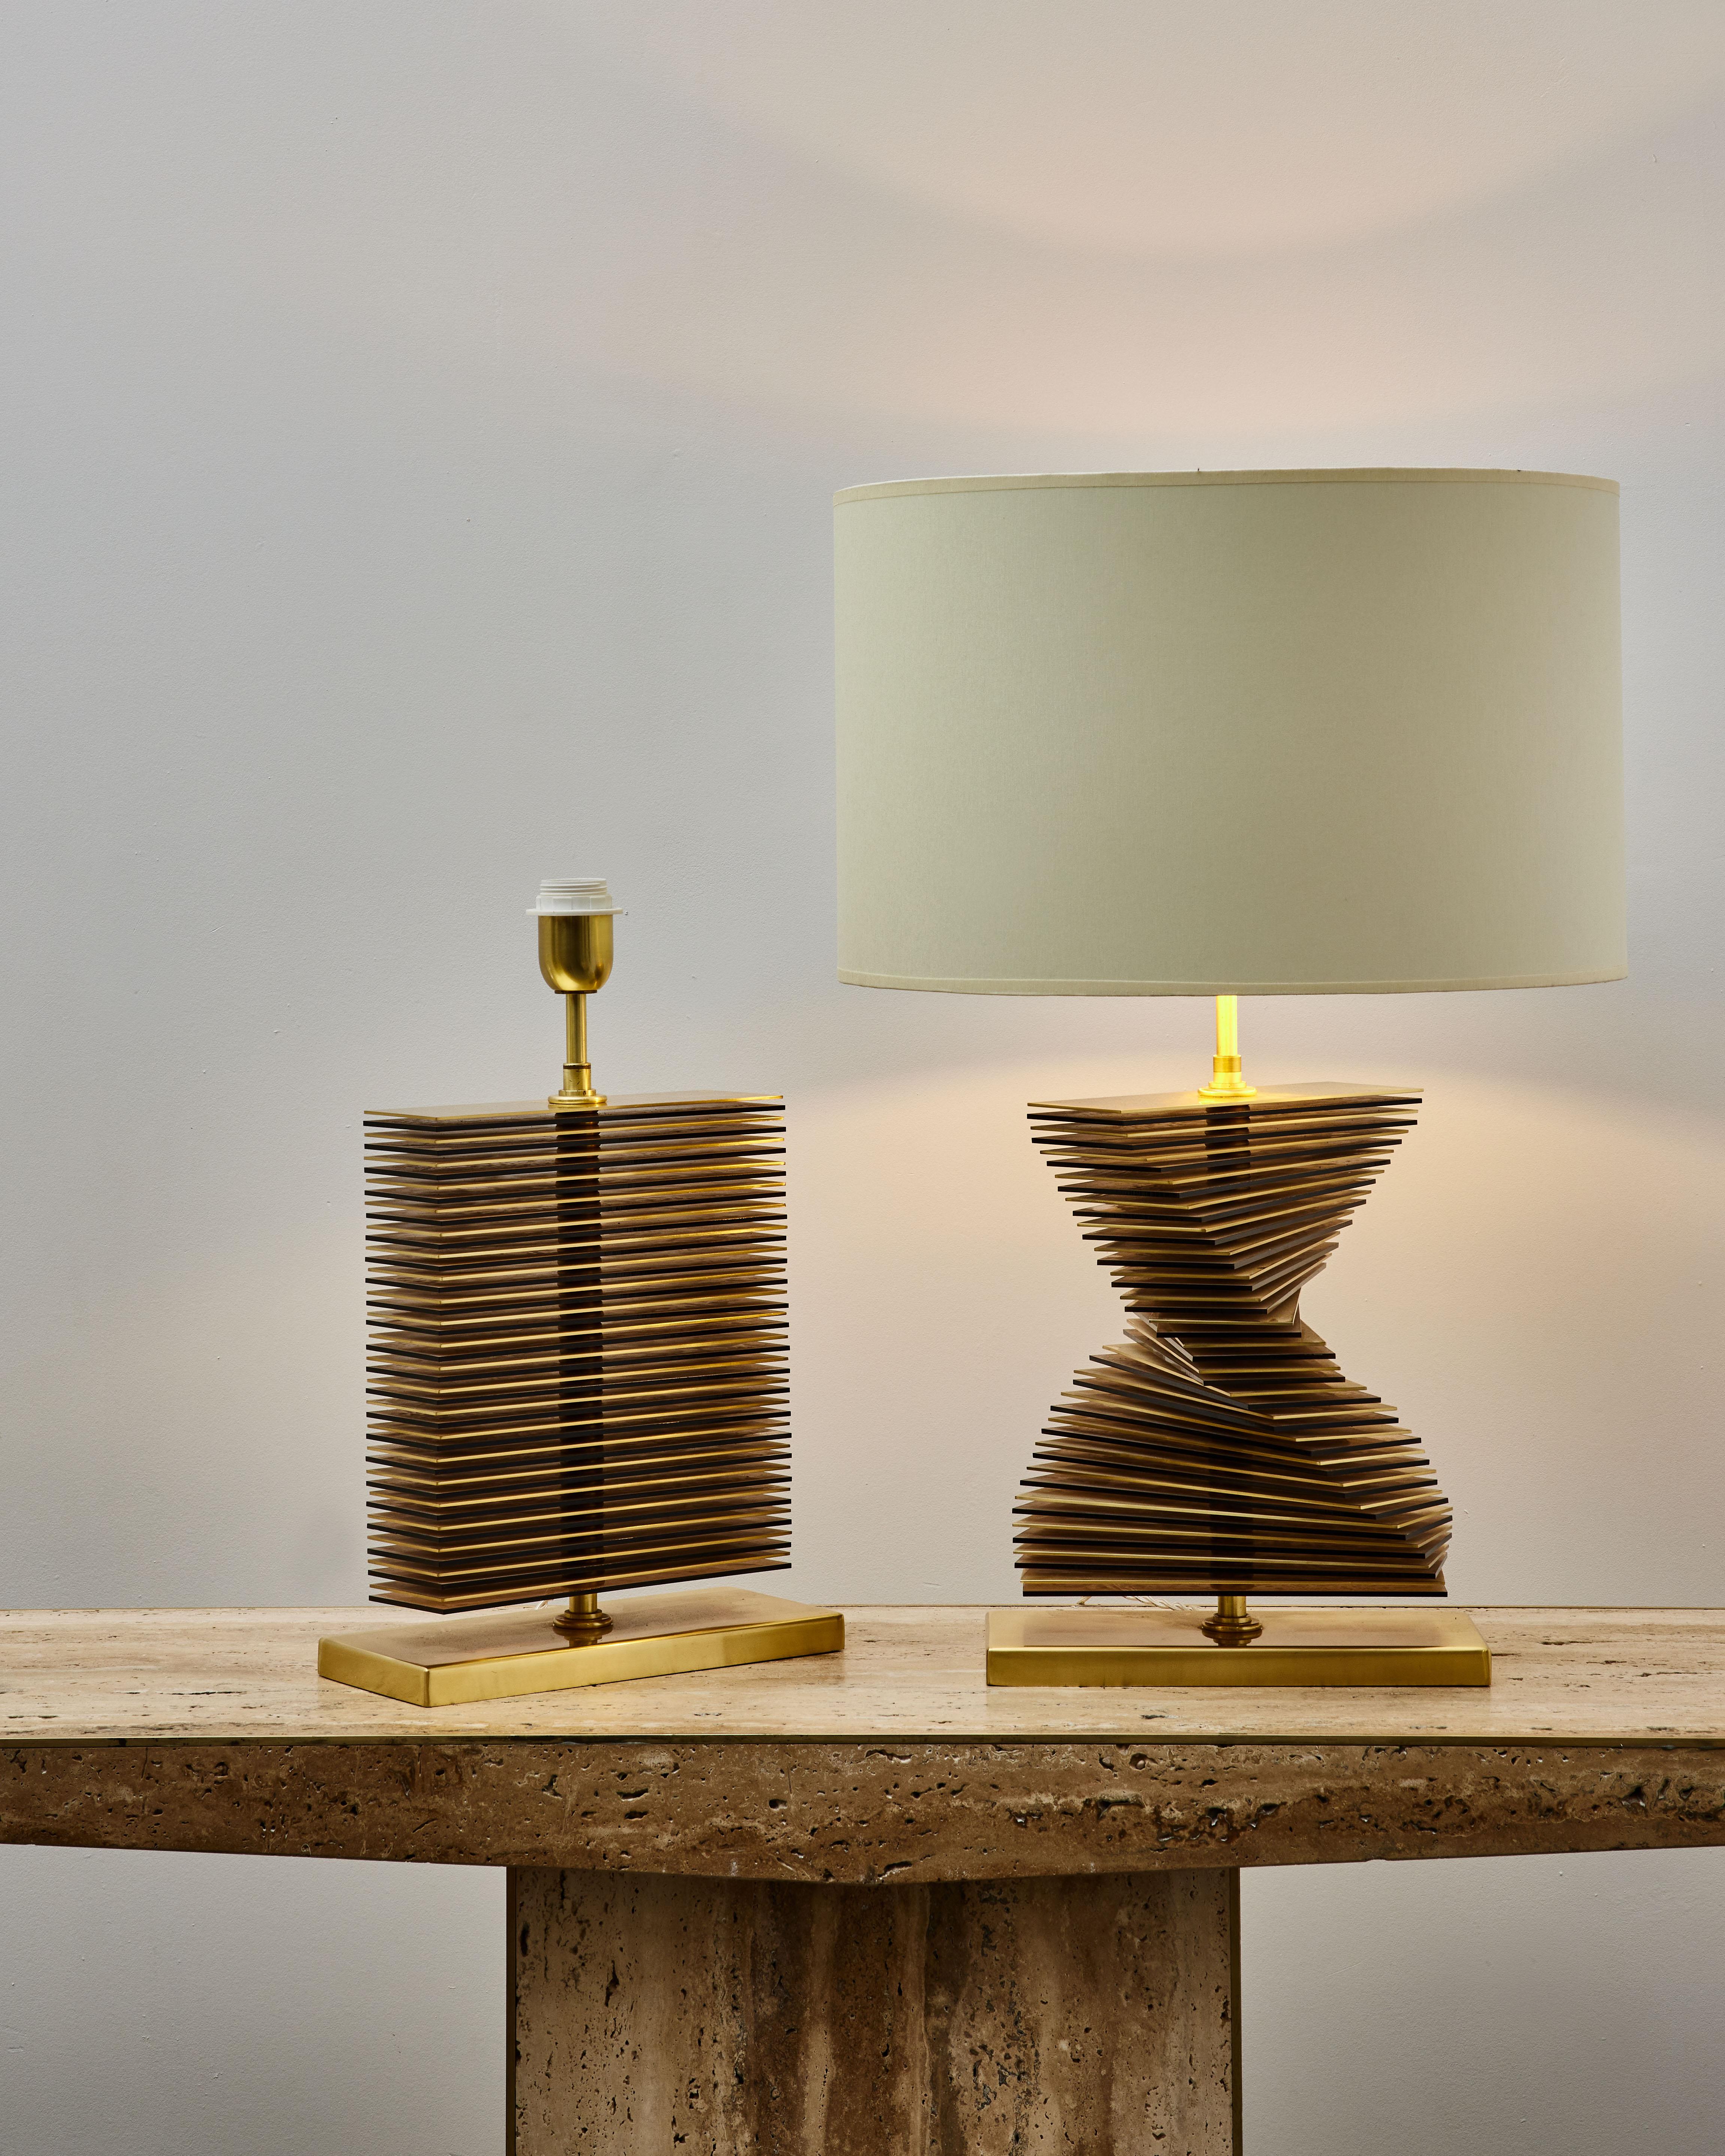 Pair of table lamps with brass and smoked glass slices.
Creation by Studio Glustin

Dimensions: 29 x 12 x H 46 cm (folded)
(Price and dimensions without shade).